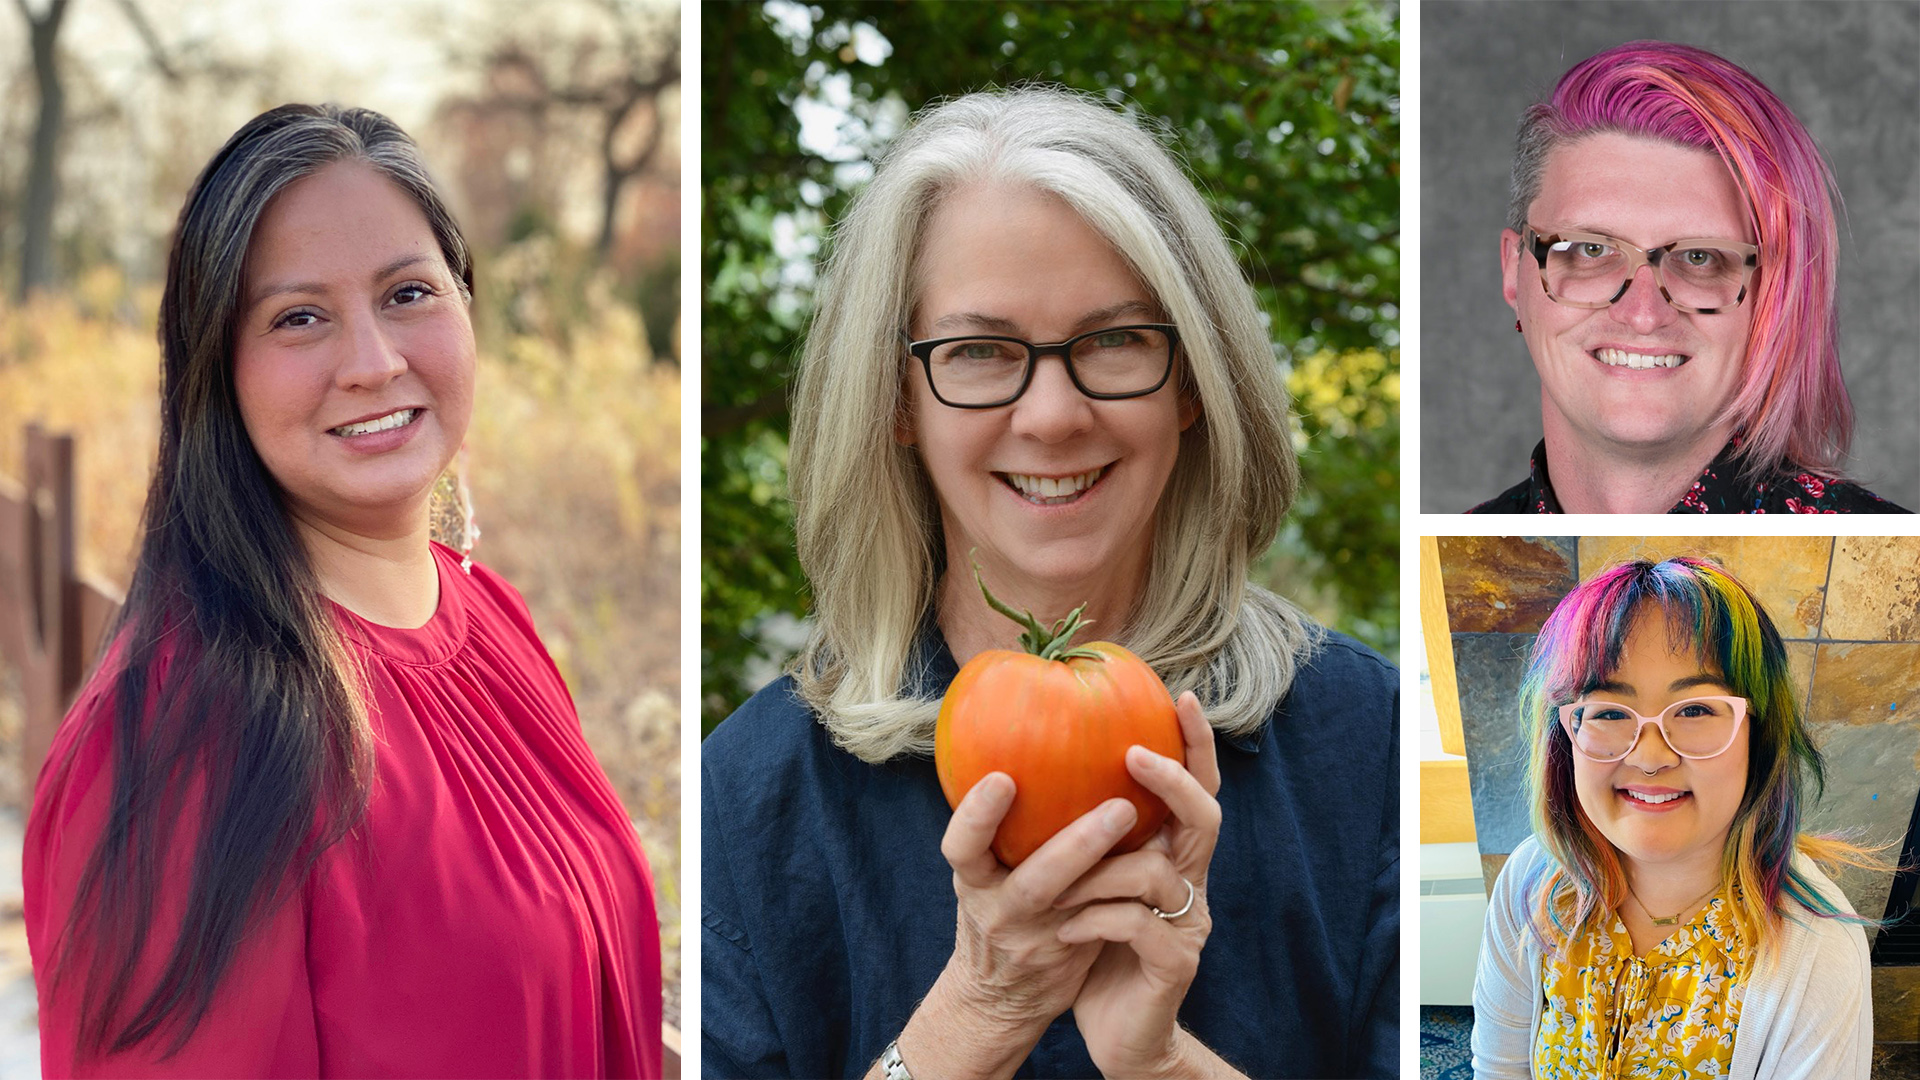 Headshots of four presenters from our Recorded Webinars. From left to right, Allison Waukau, Martha Holmberg, Travis L. Wagner Ph.D., and Melissa Brinn.